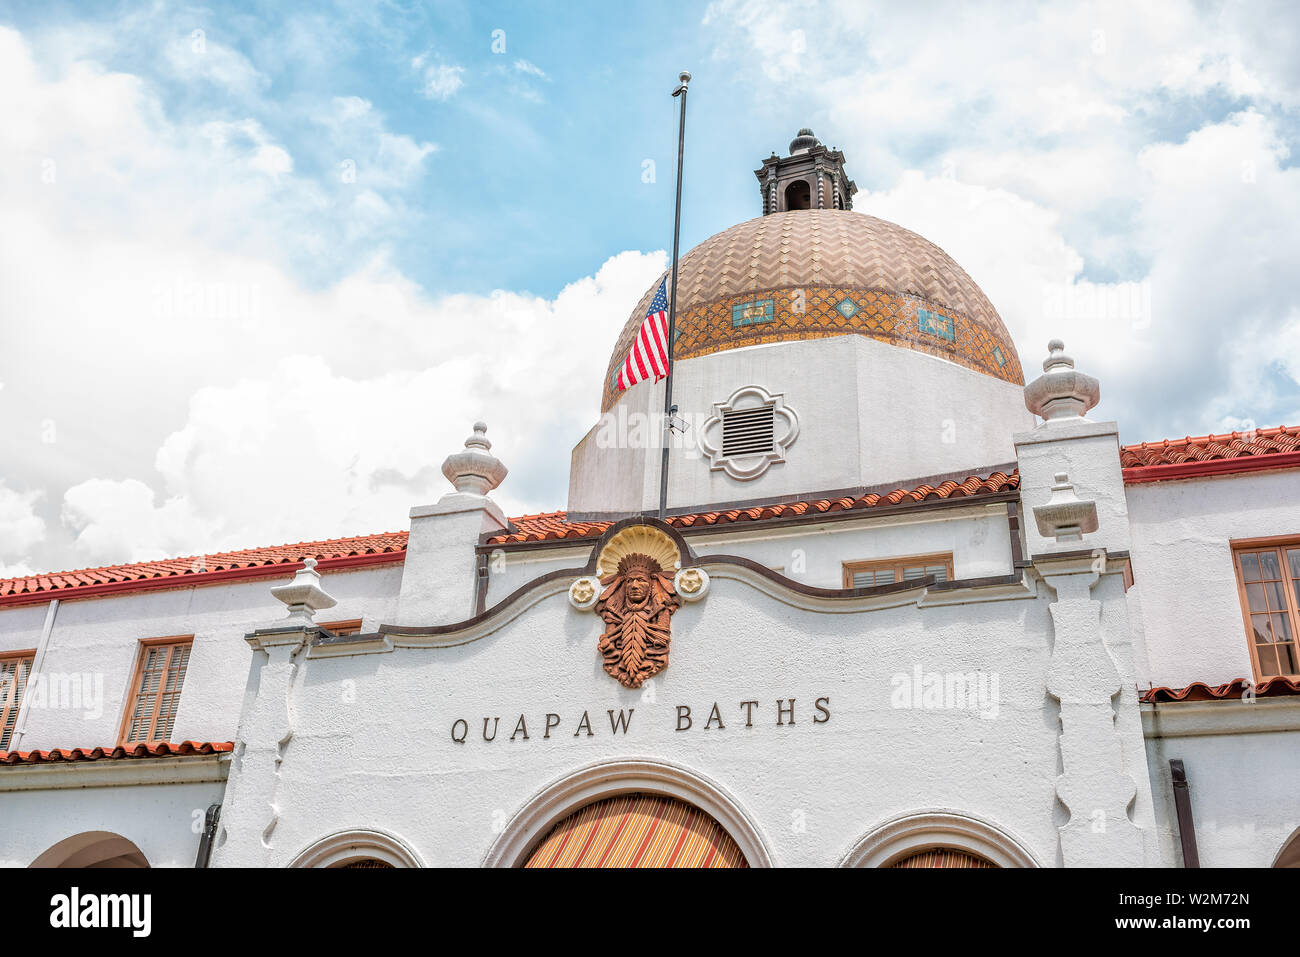 Hot Springs, USA - June 4, 2019: Historical Quapaw Baths Spa bath house with American flag and dome in city Stock Photo